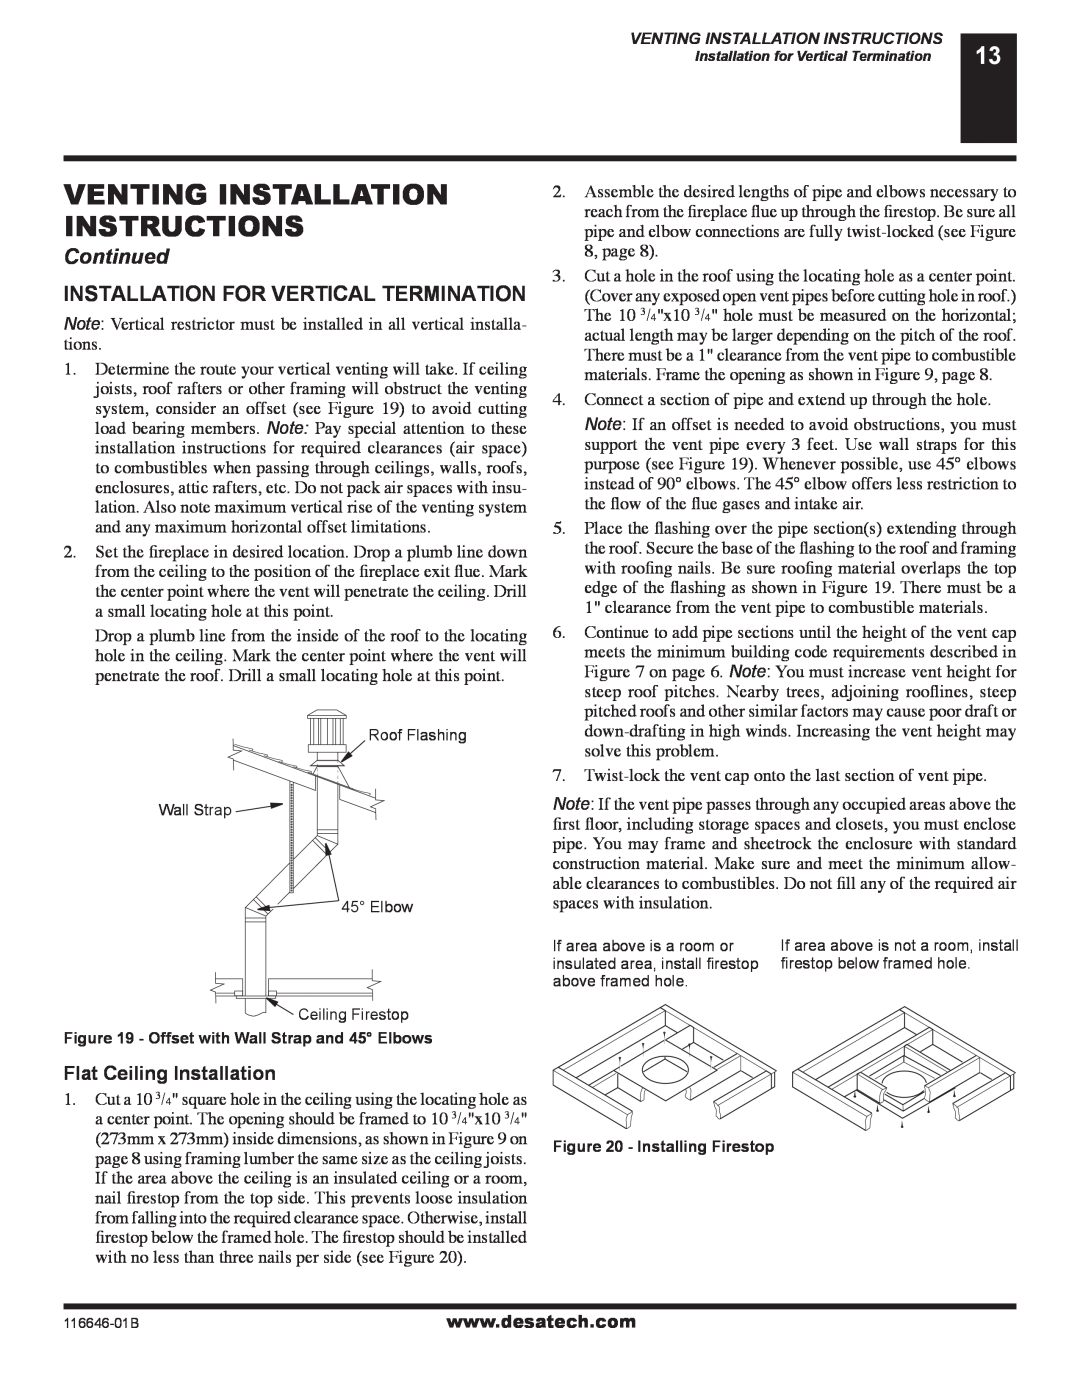 Desa (V)T32P-A SERIES, (V)T32N-A SERIES Venting Installation Instructions, Continued, Flat Ceiling Installation 